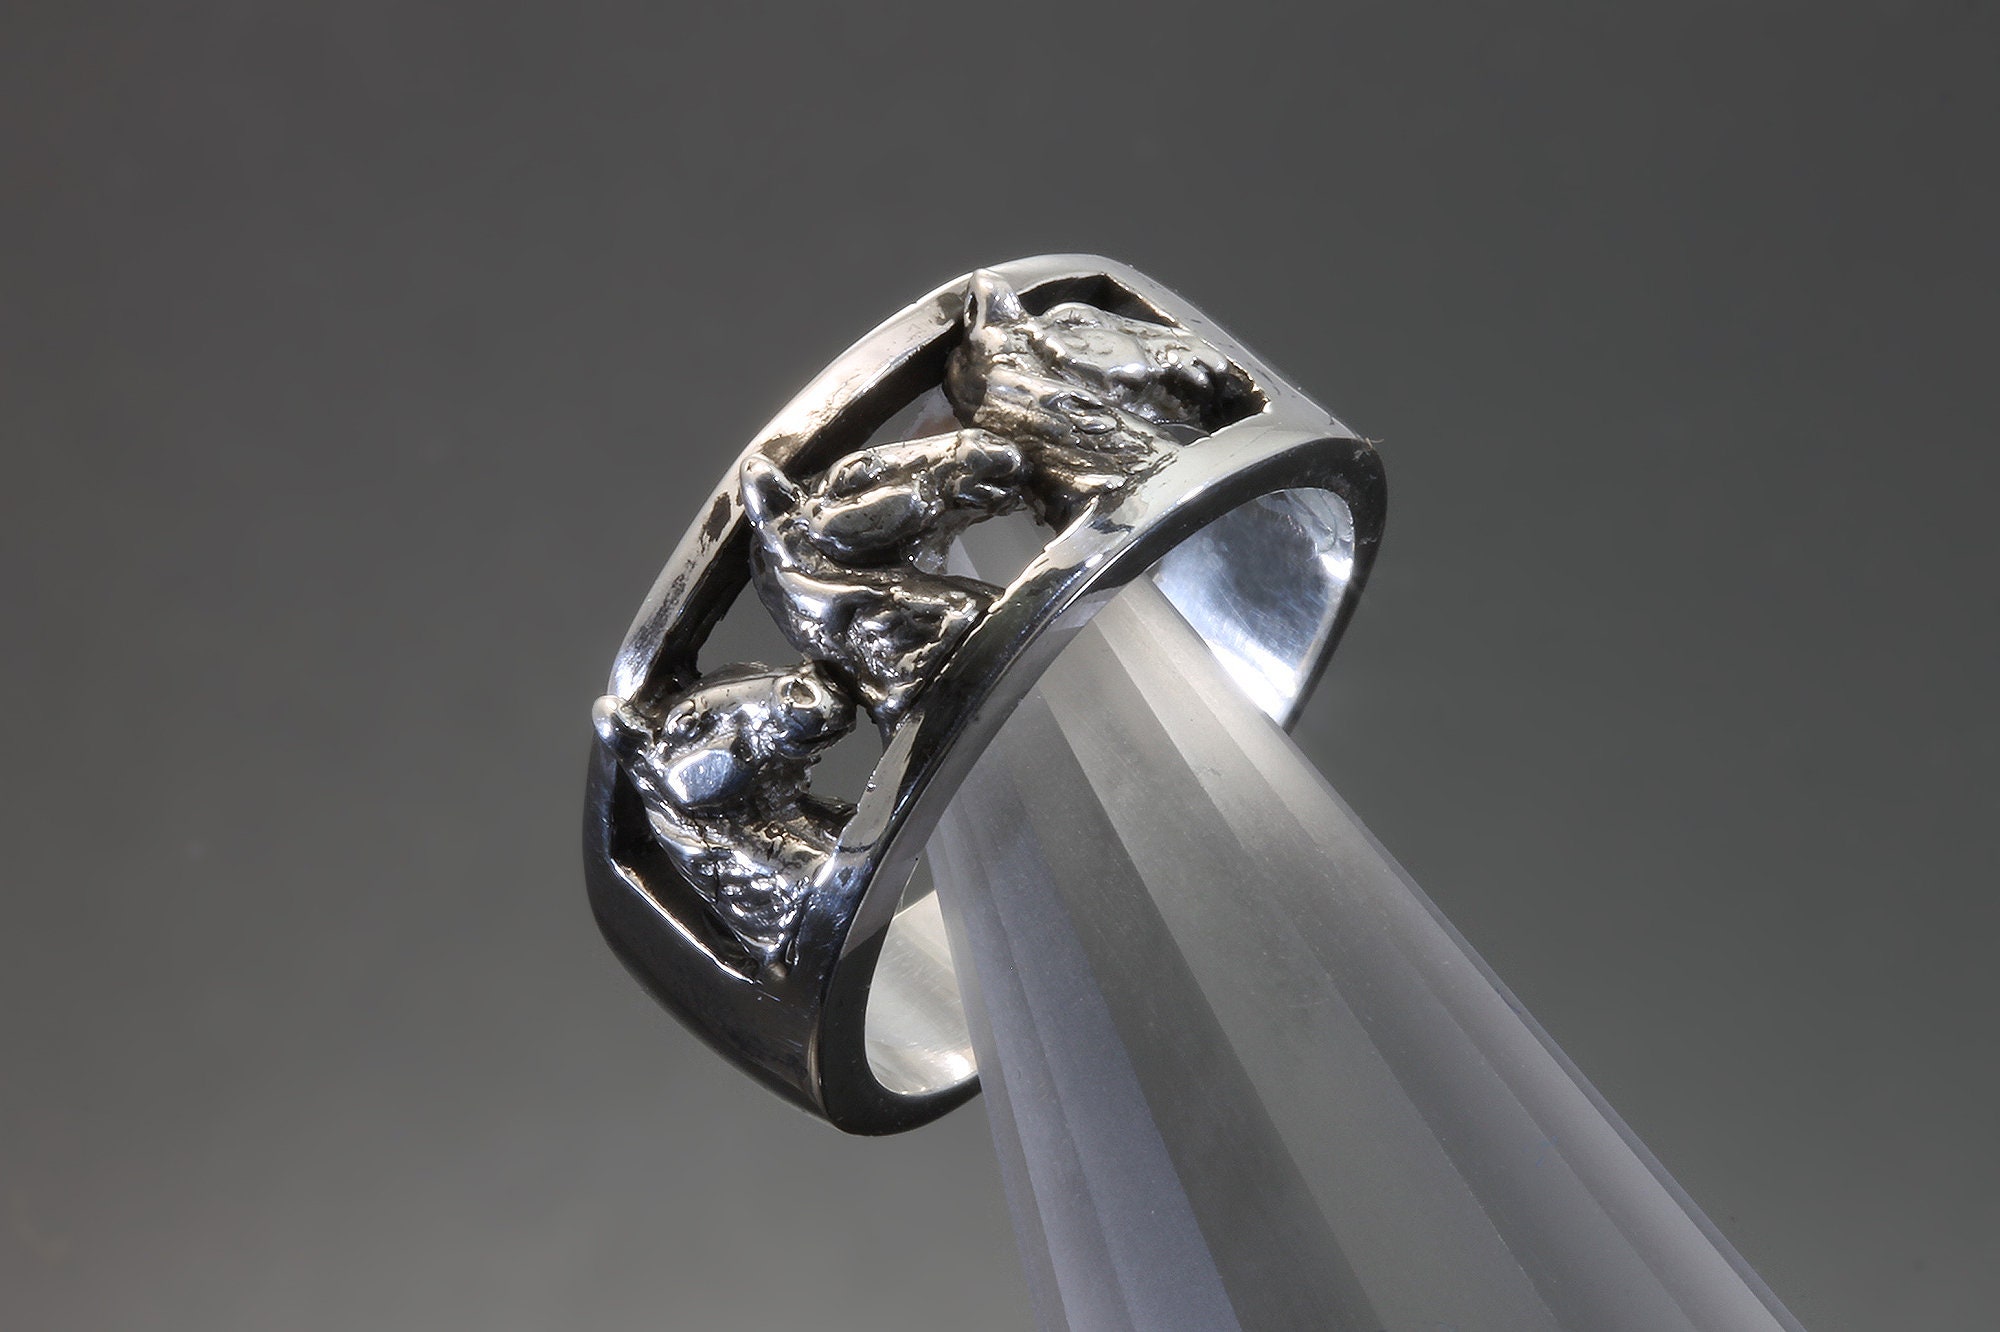 Buy Horse Ring in Sterling Silver Metal, Horse Band Ring, Wedding Band Ring,  Engraved Horse Ring, Horse Jewelry, Horse Rider Ring, Animal Ring Online in  India - Etsy